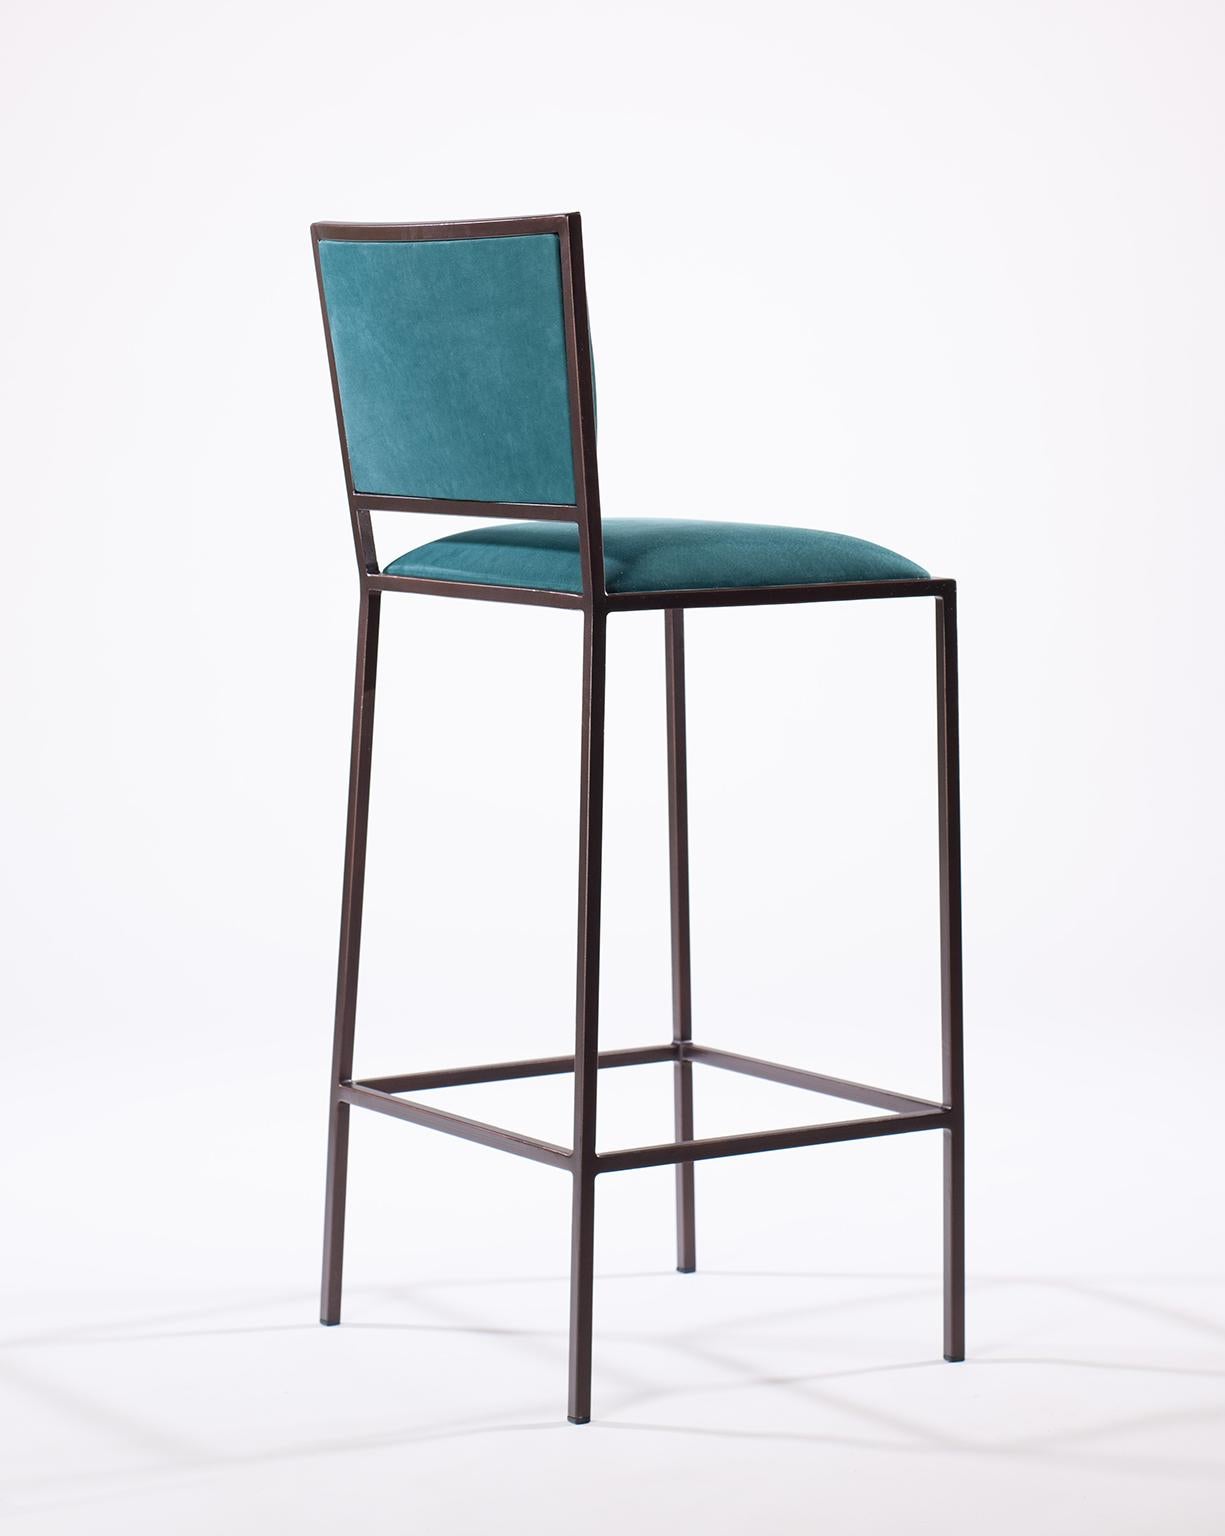 Italian 21st Century Leather Upholstered Stool in a Linear Steel Frame Simple Bar Chair For Sale